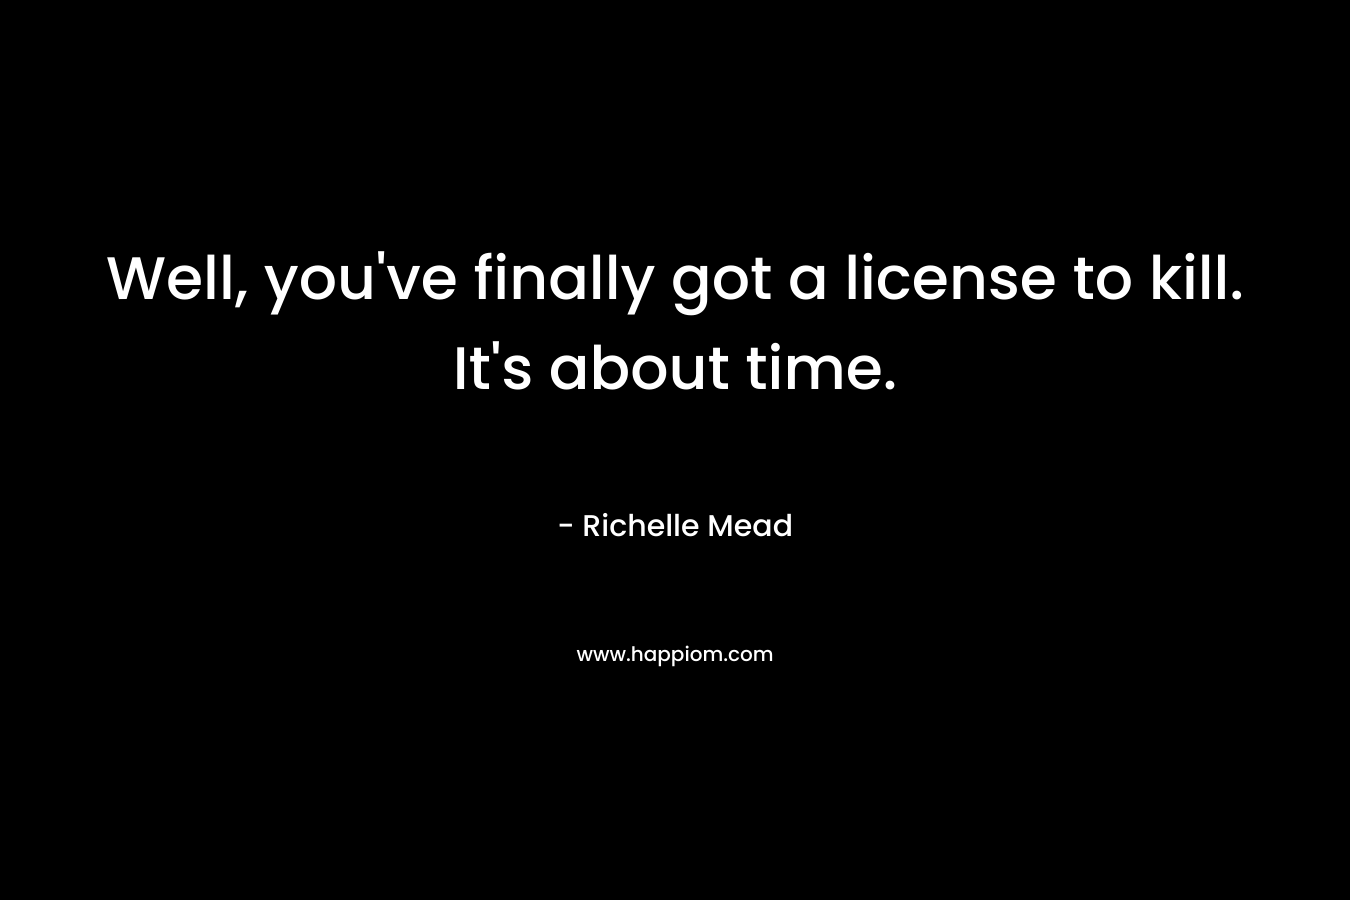 Well, you’ve finally got a license to kill. It’s about time. – Richelle Mead